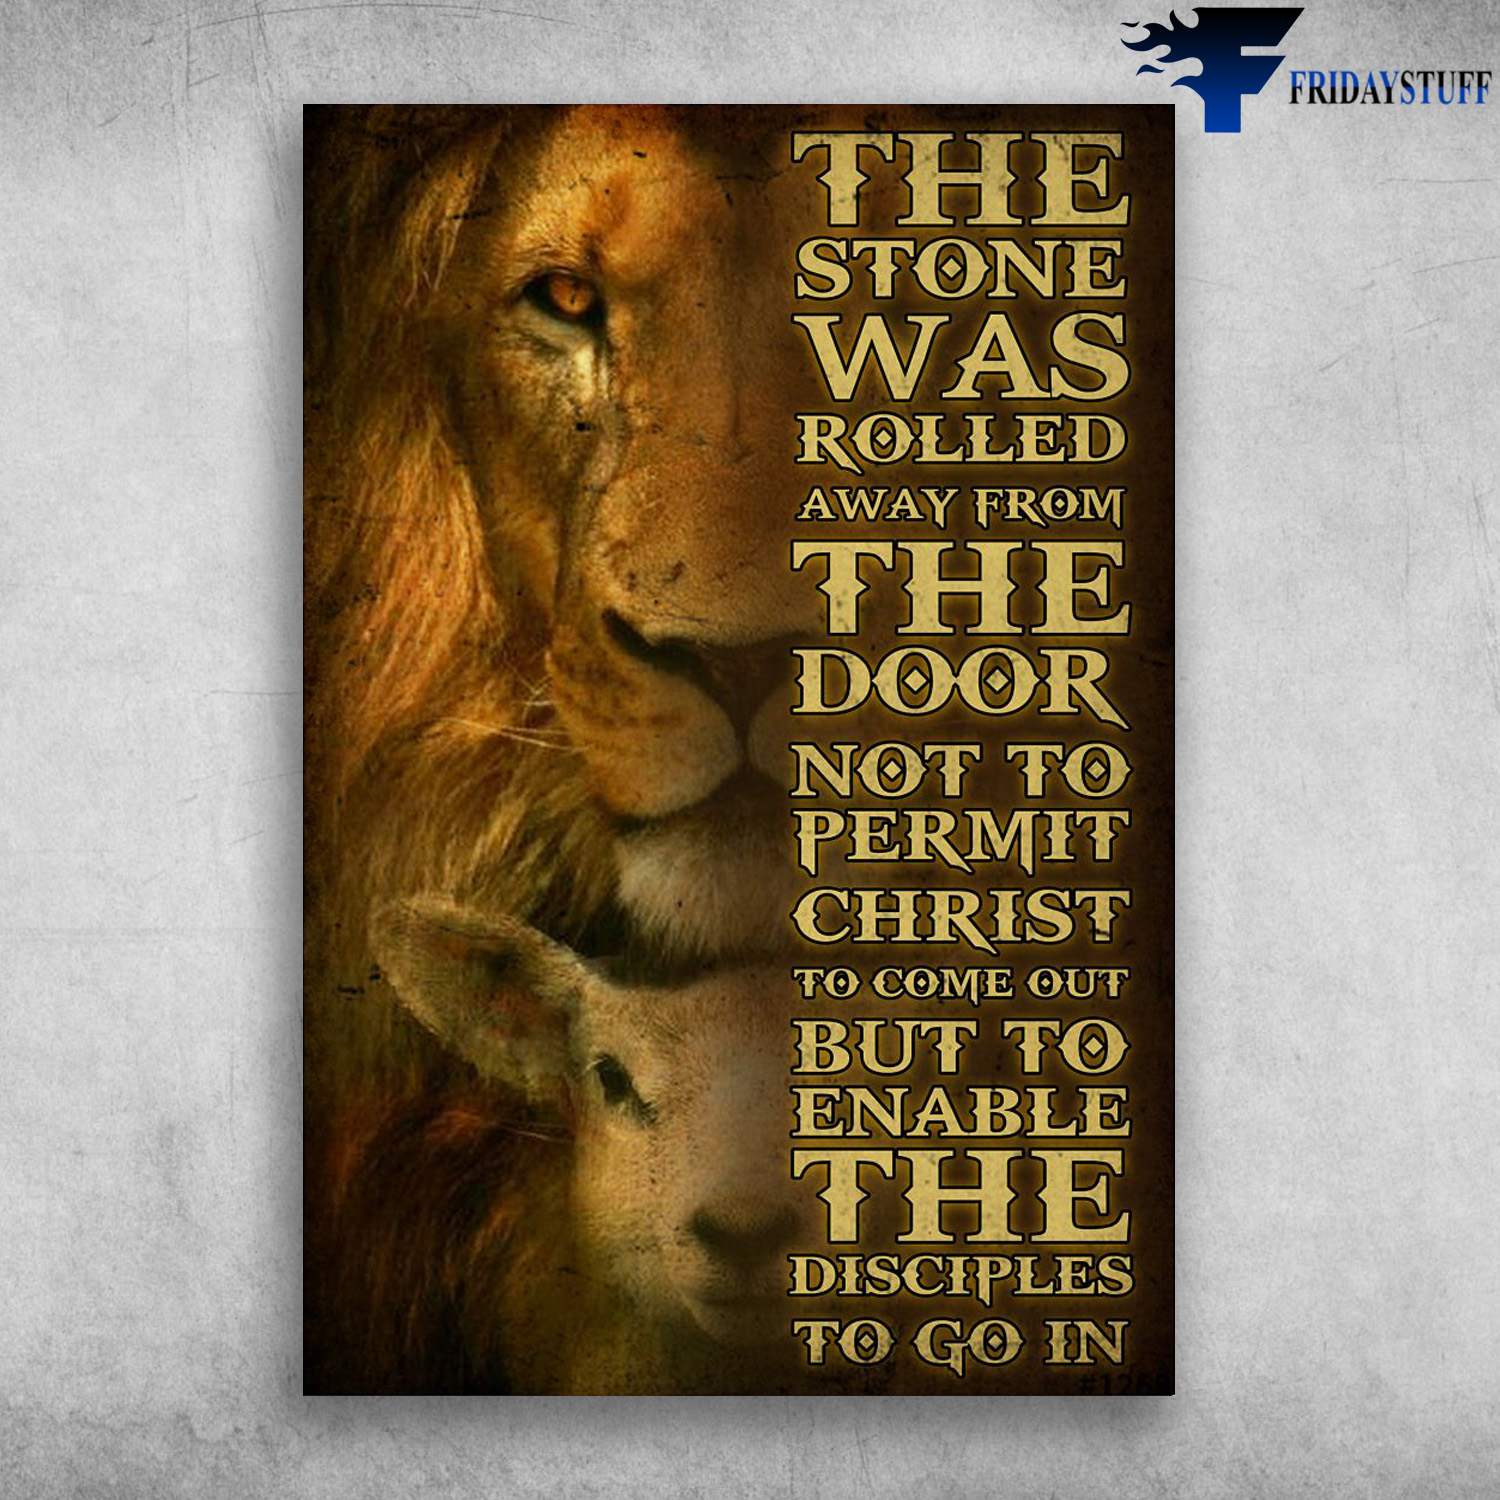 Lion And Lamb - The Stone Was Rolled Away From The Door, Not To Permit Christ To Come Out But To Enable, The Disciples To Go In